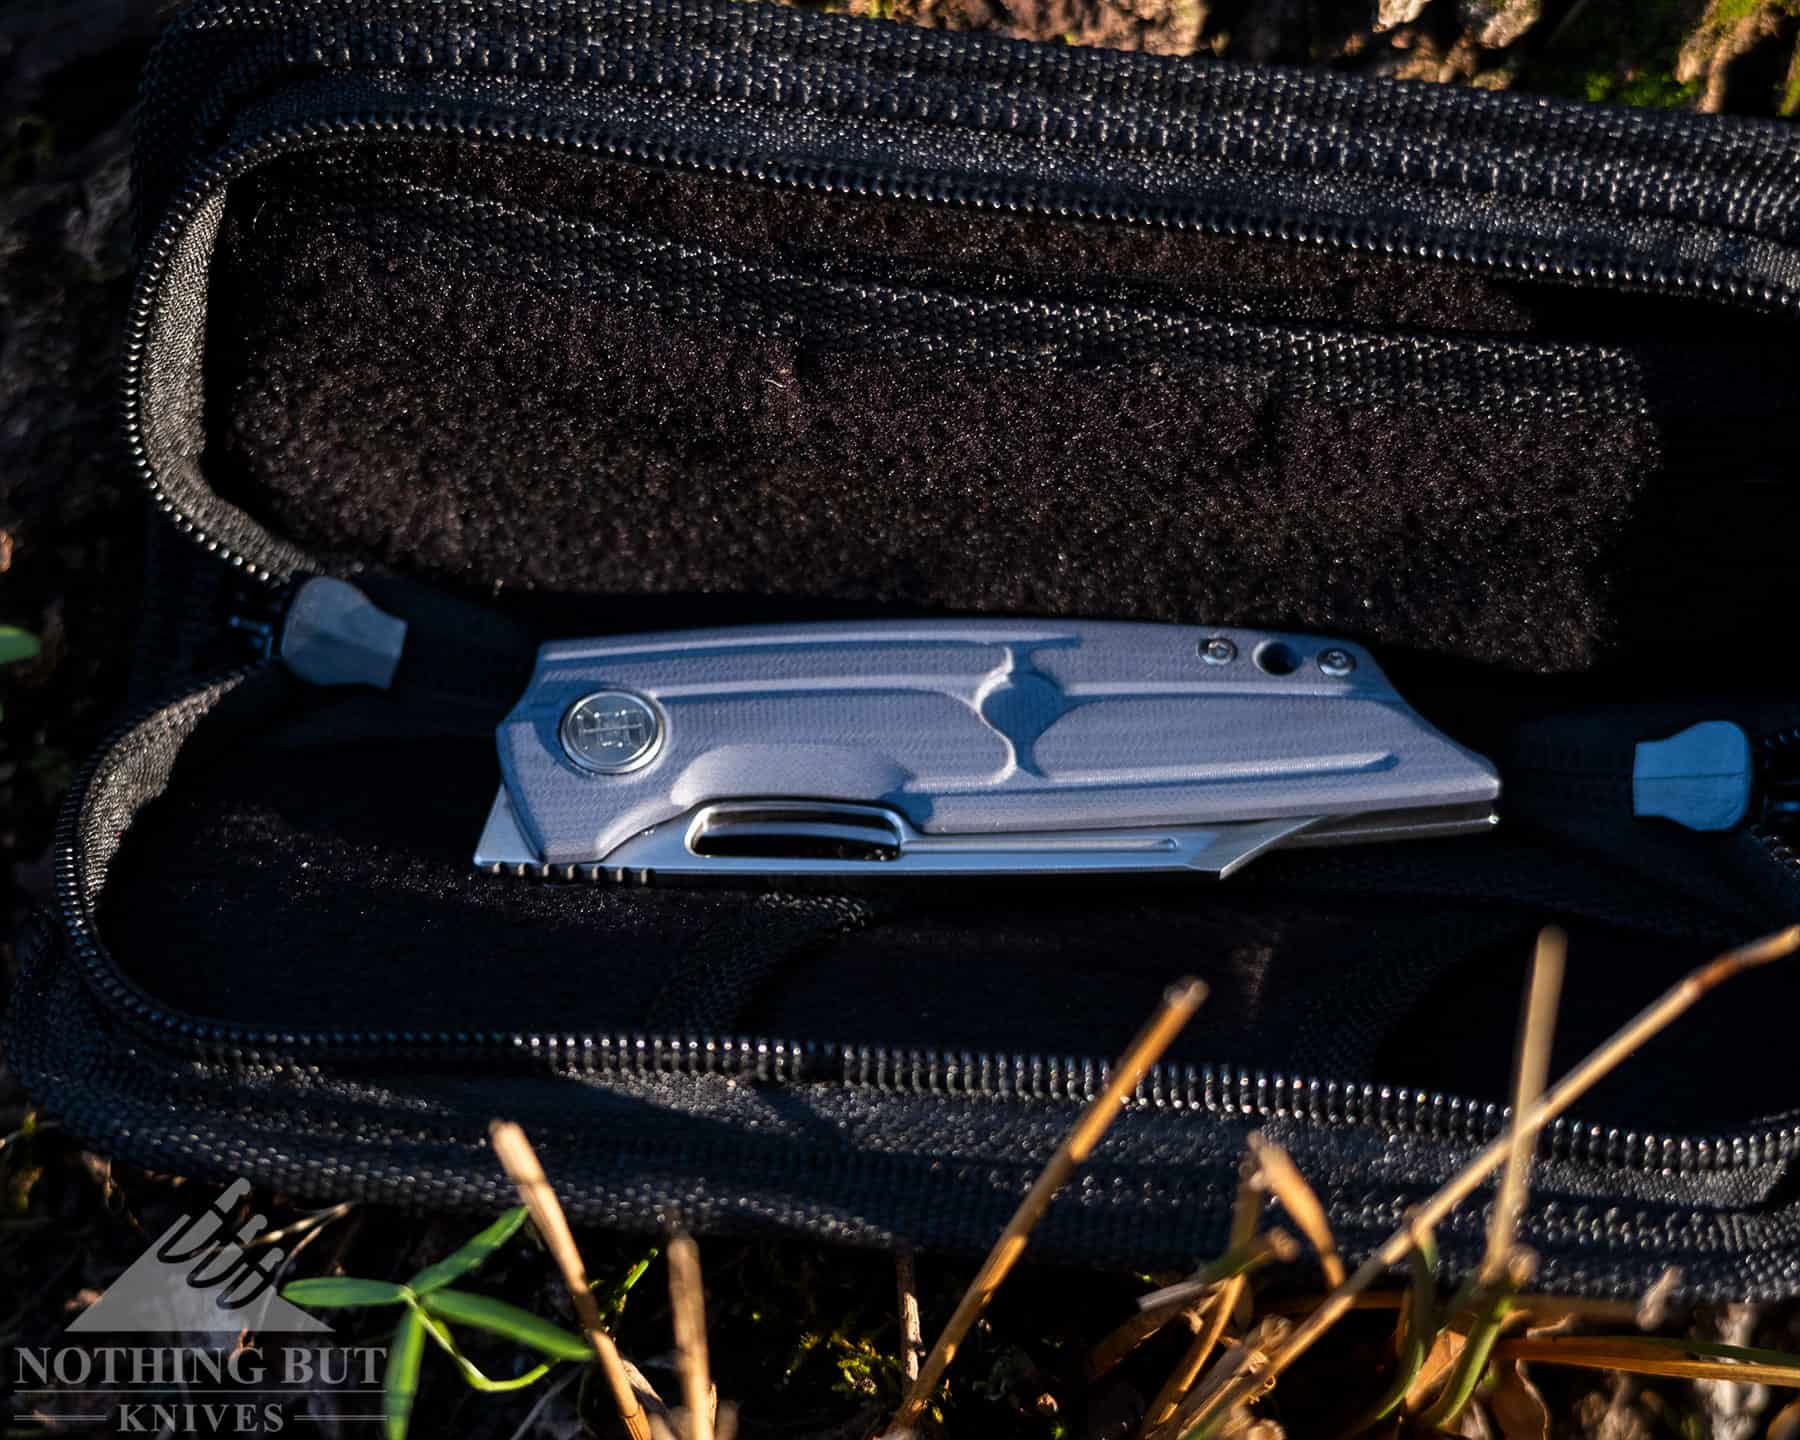 This image shows the Boker Plus HEA Hunter in the nylon case that ships with the knife. 